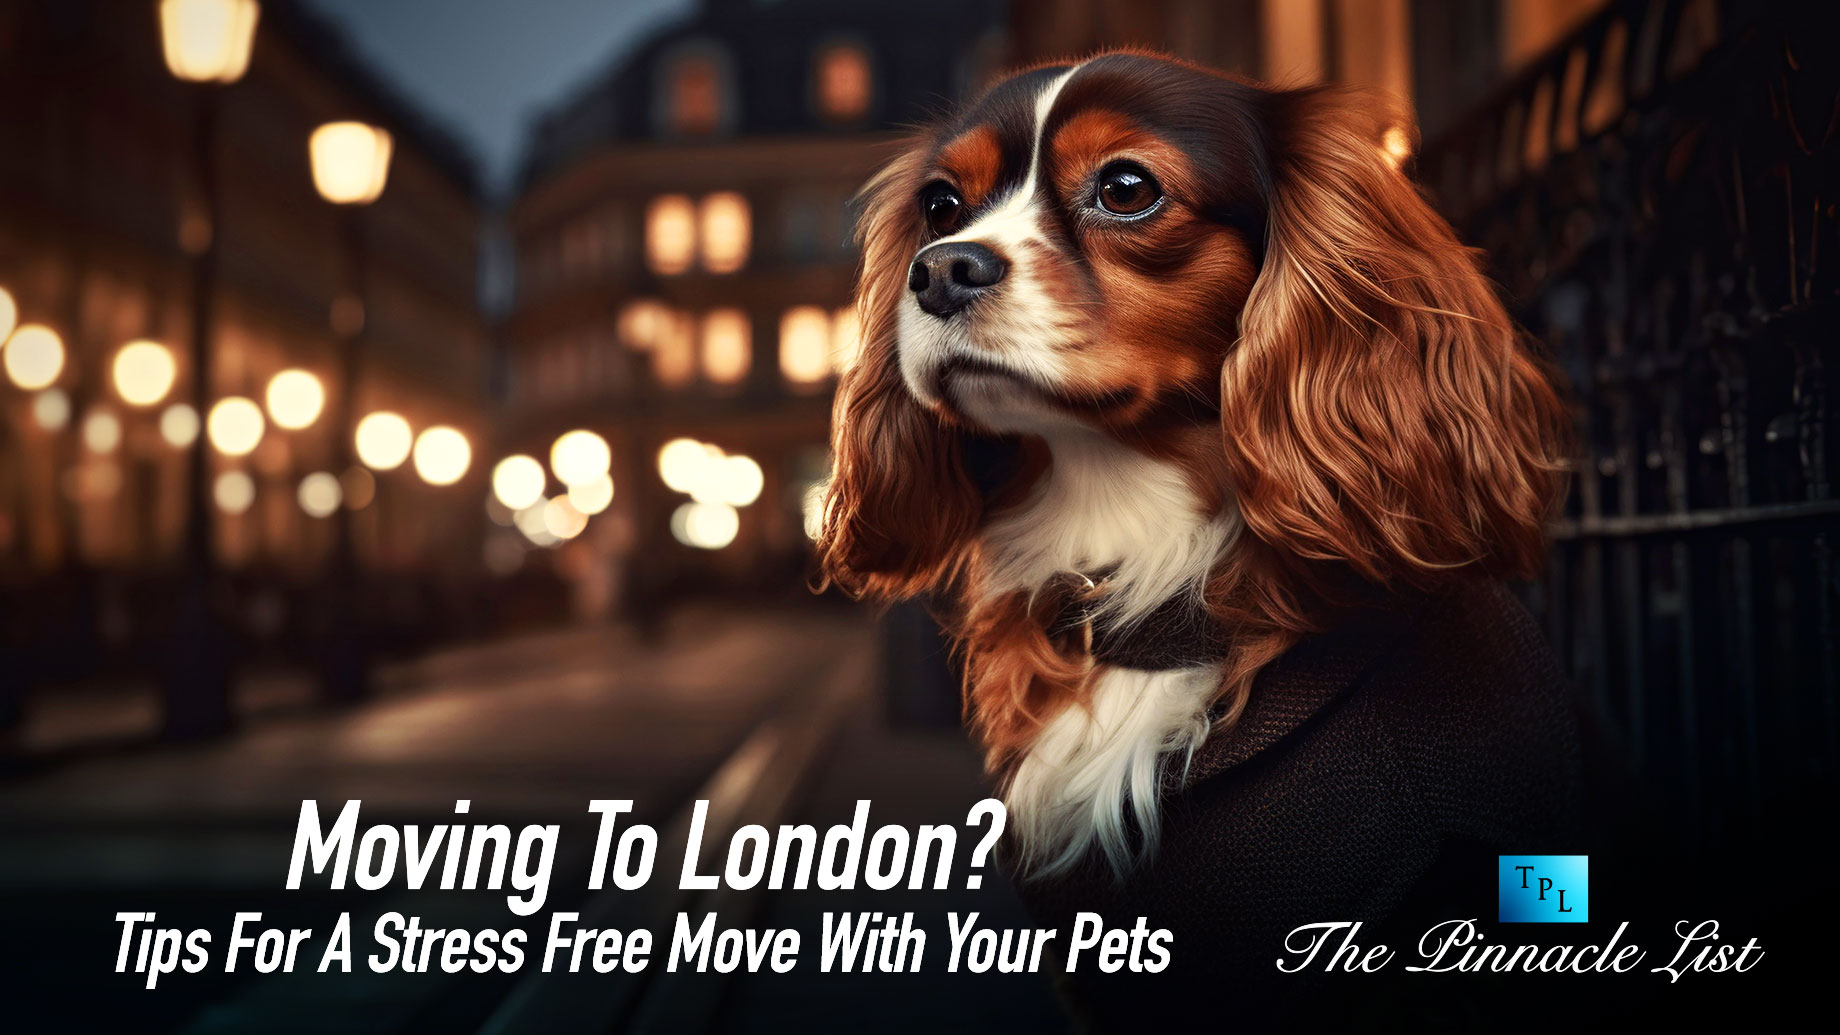 Moving To London? Tips For A Stress Free Move With Your Pets